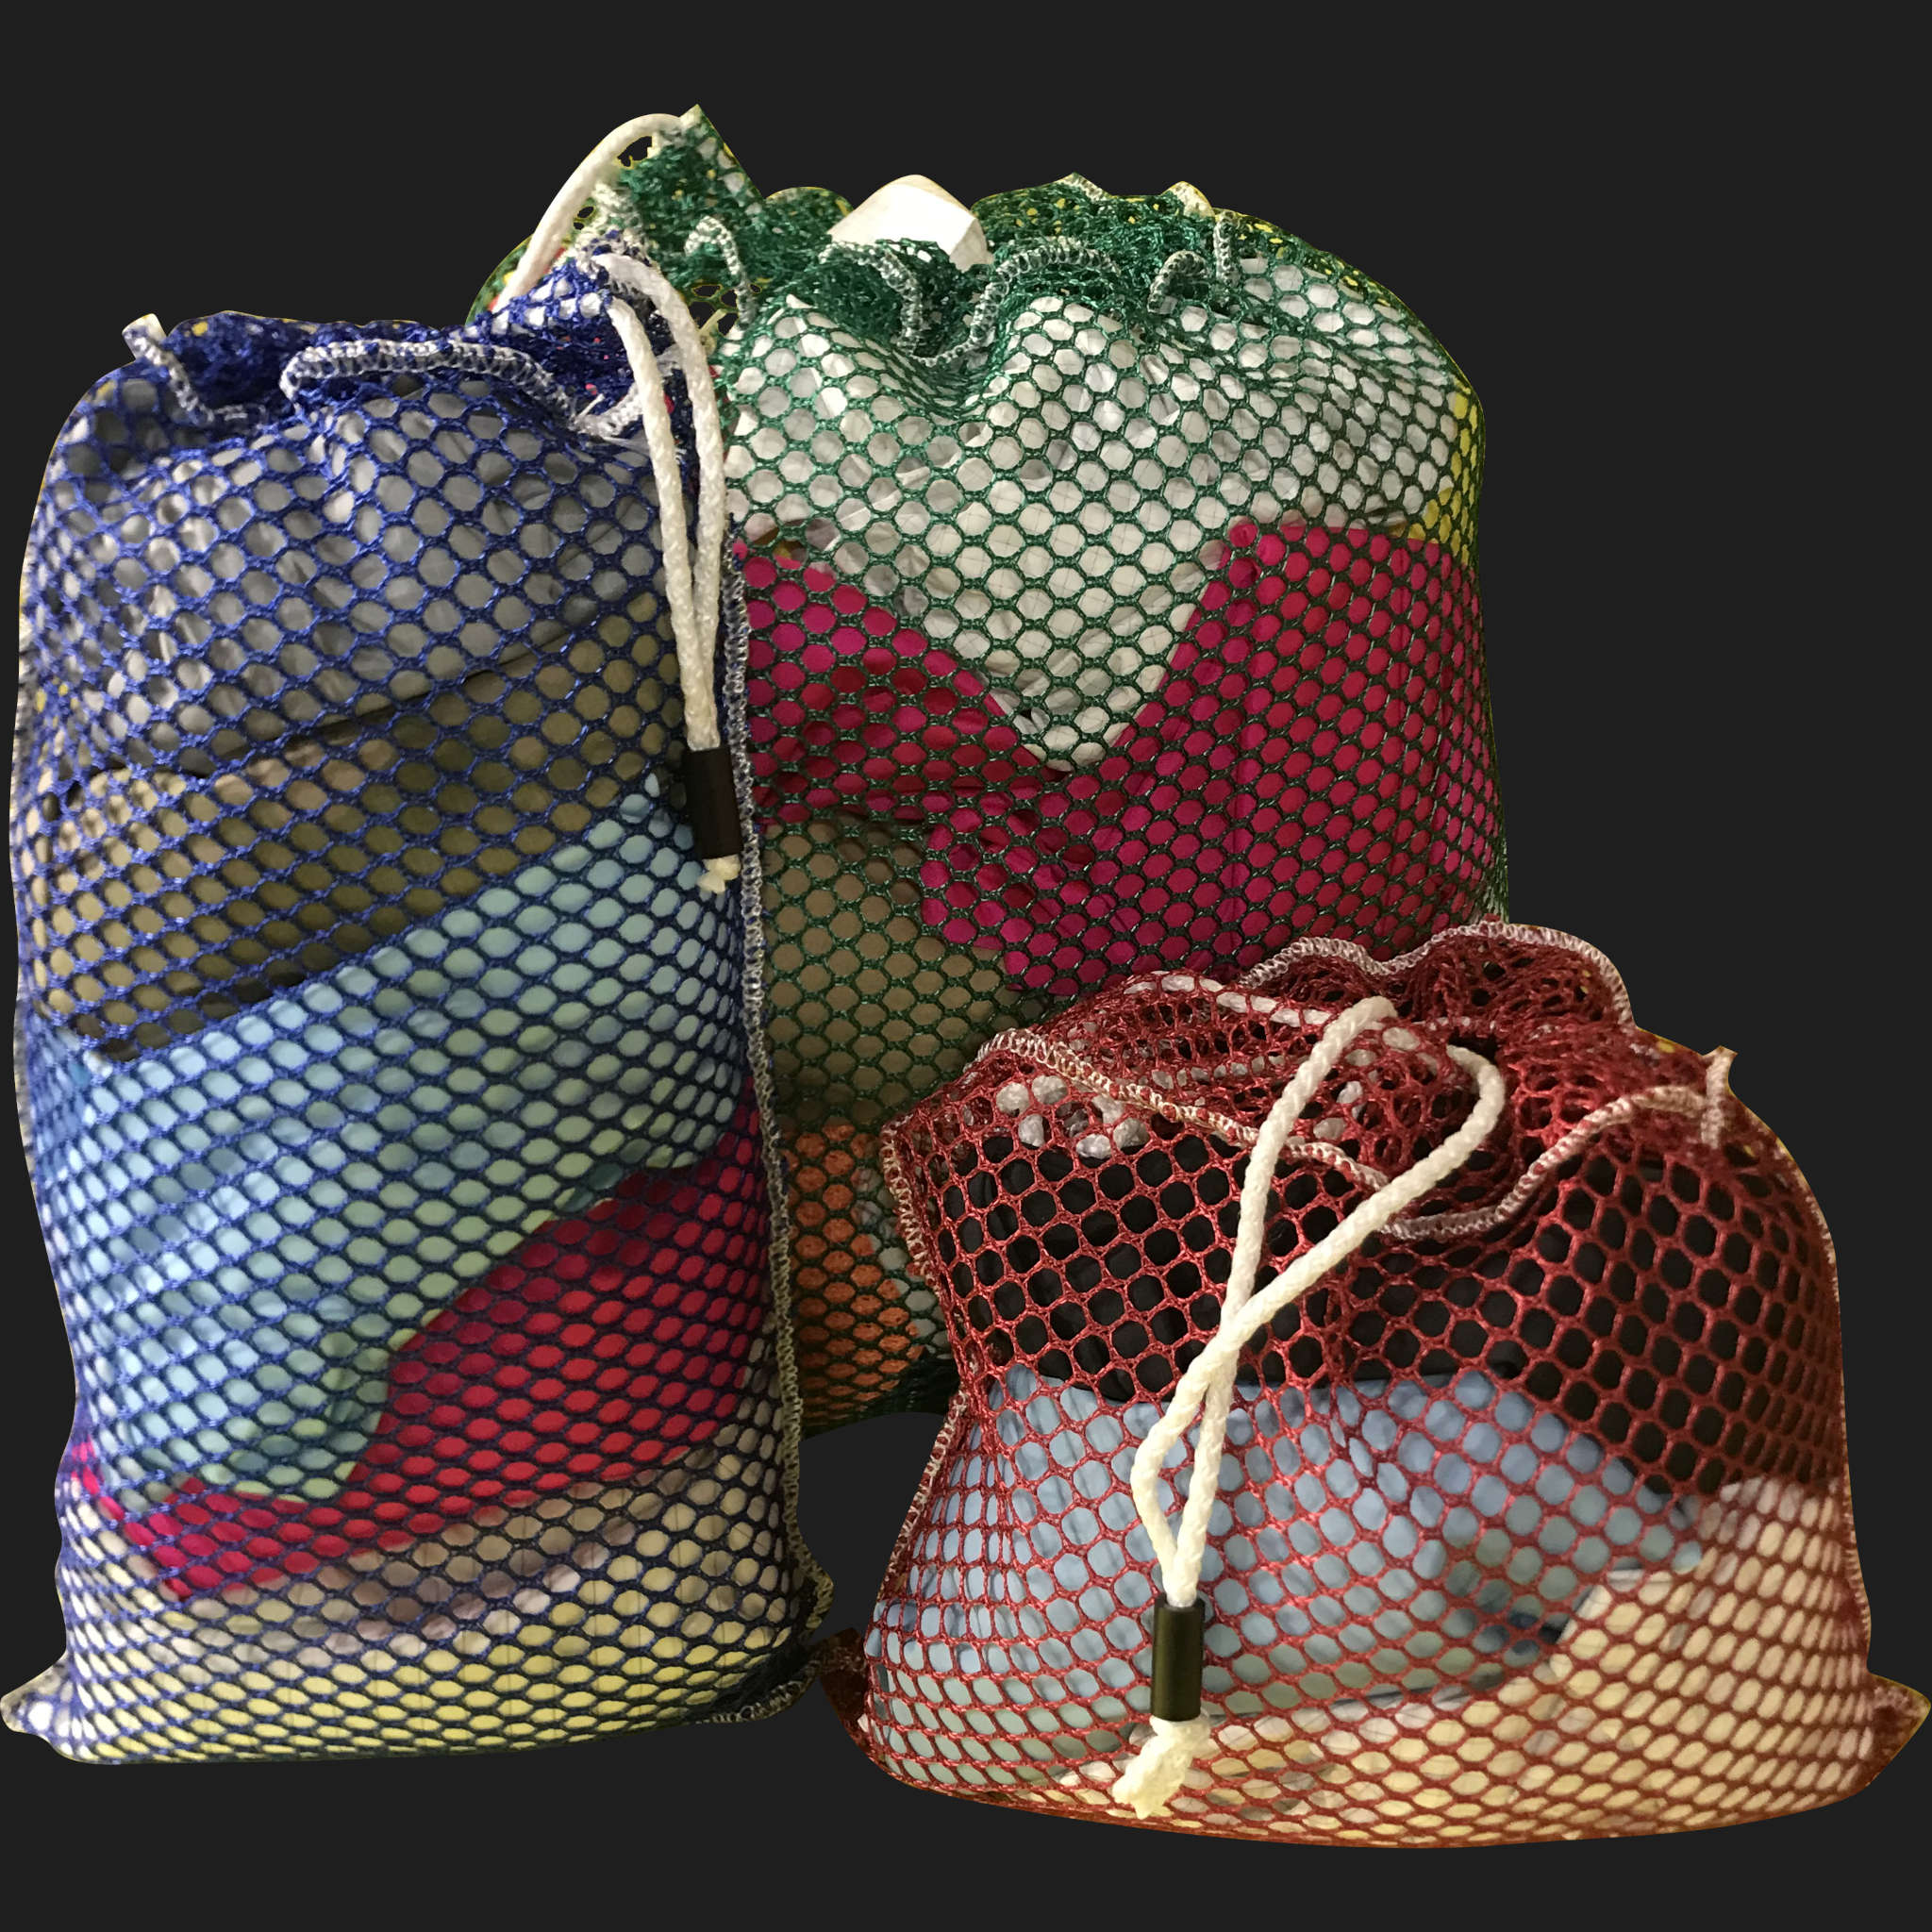 20" x 26" Customized Mesh-Net-Laundry Bags Heavy Duty with Cord and barrellock closure